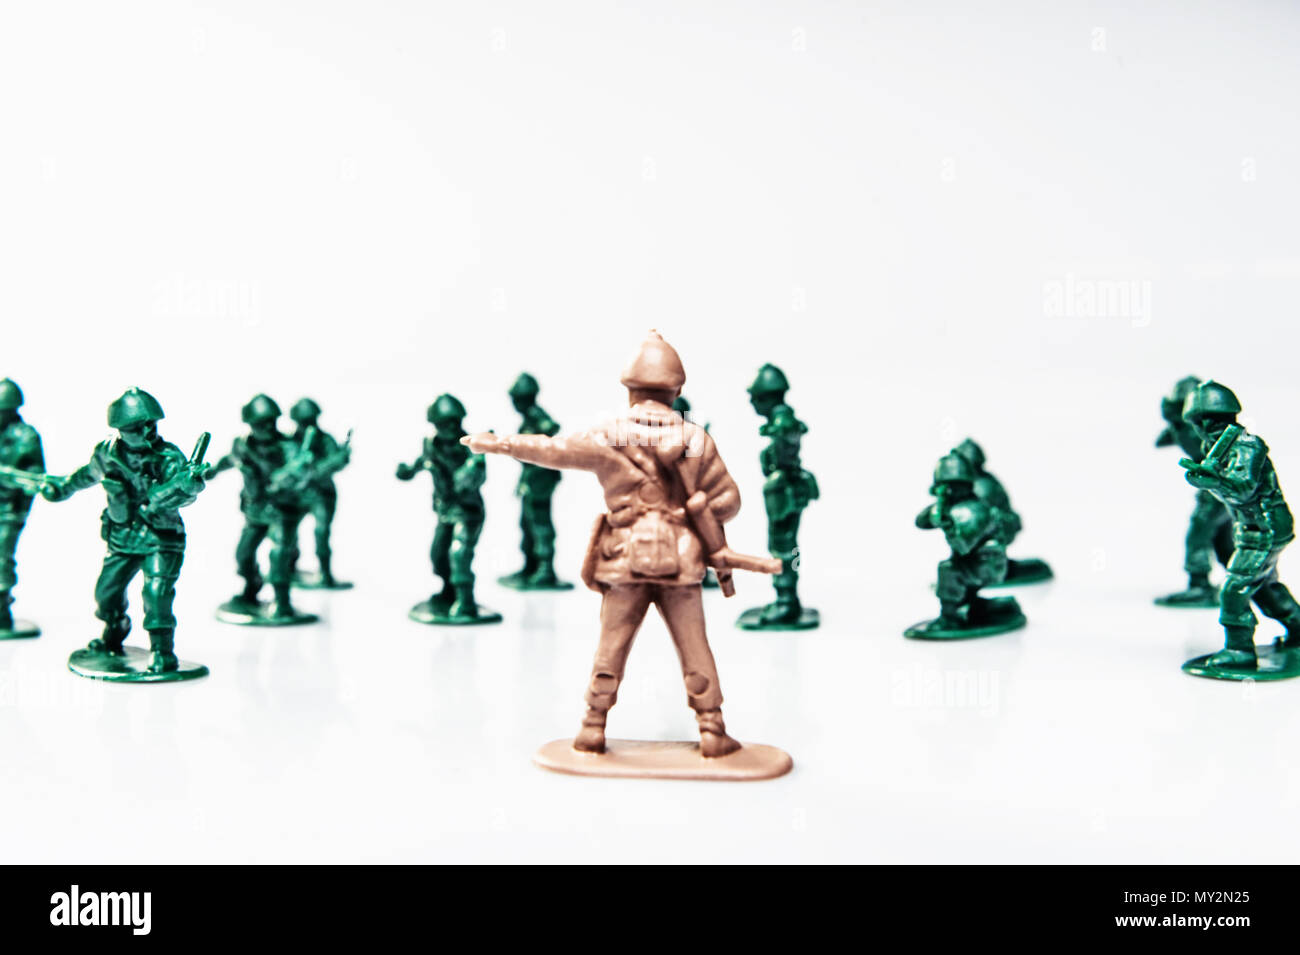 BATTLE OF SOLDIERS ON WHITE BACKGROUND Stock Photo